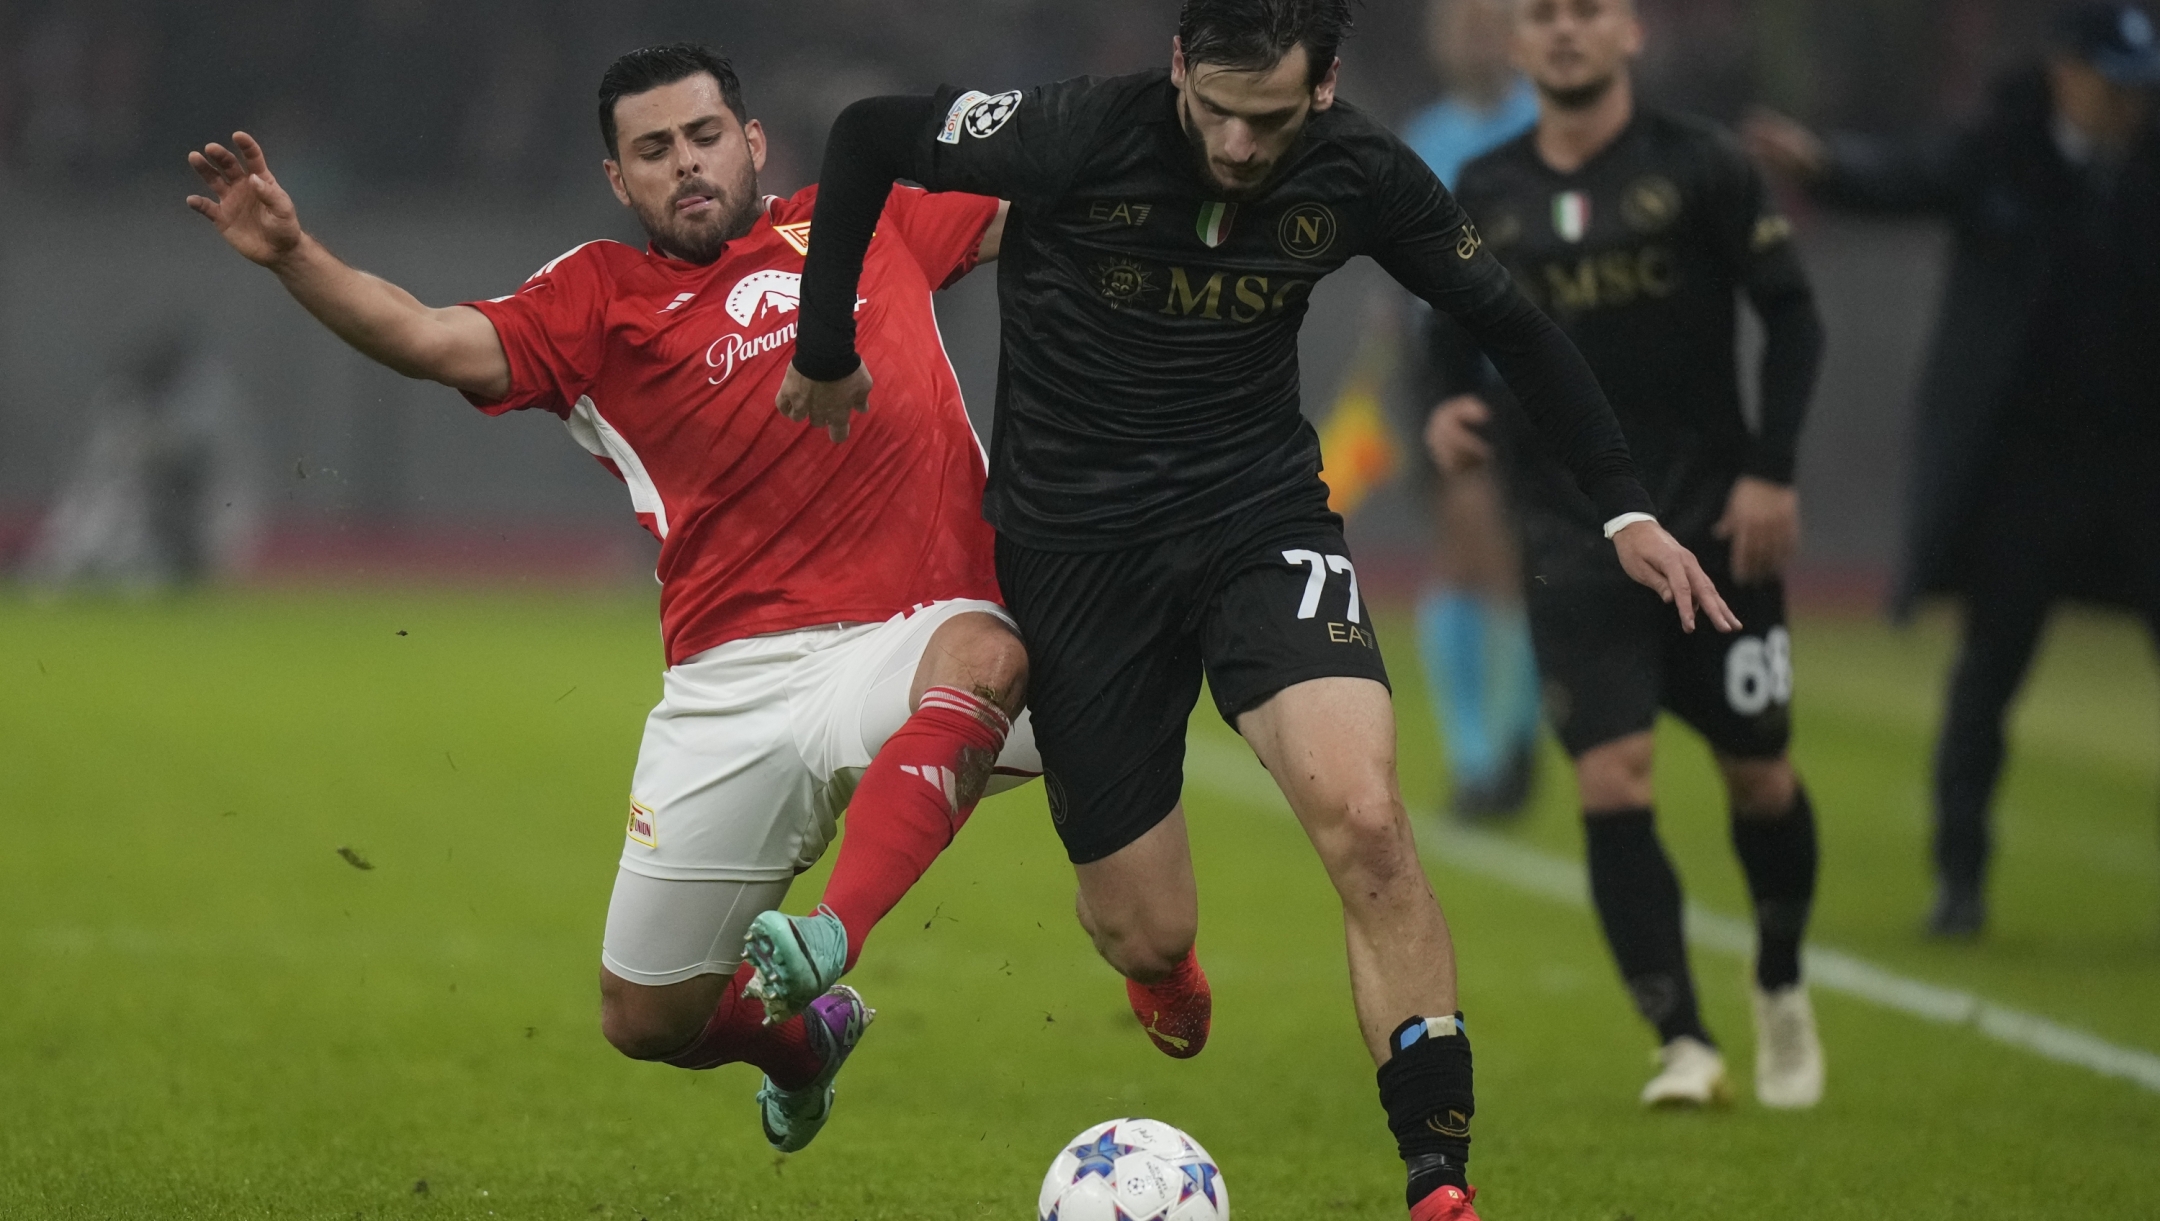 Union's Kevin Volland, left, and Napoli's Khvicha Kvaratskhelia vie for the ball during the group C Champions League soccer match between Union Berlin and Napoli, at the Olympiastadion in Berlin, Germany, Tuesday, Oct. 24, 2023. (AP Photo/Matthias Schrader)